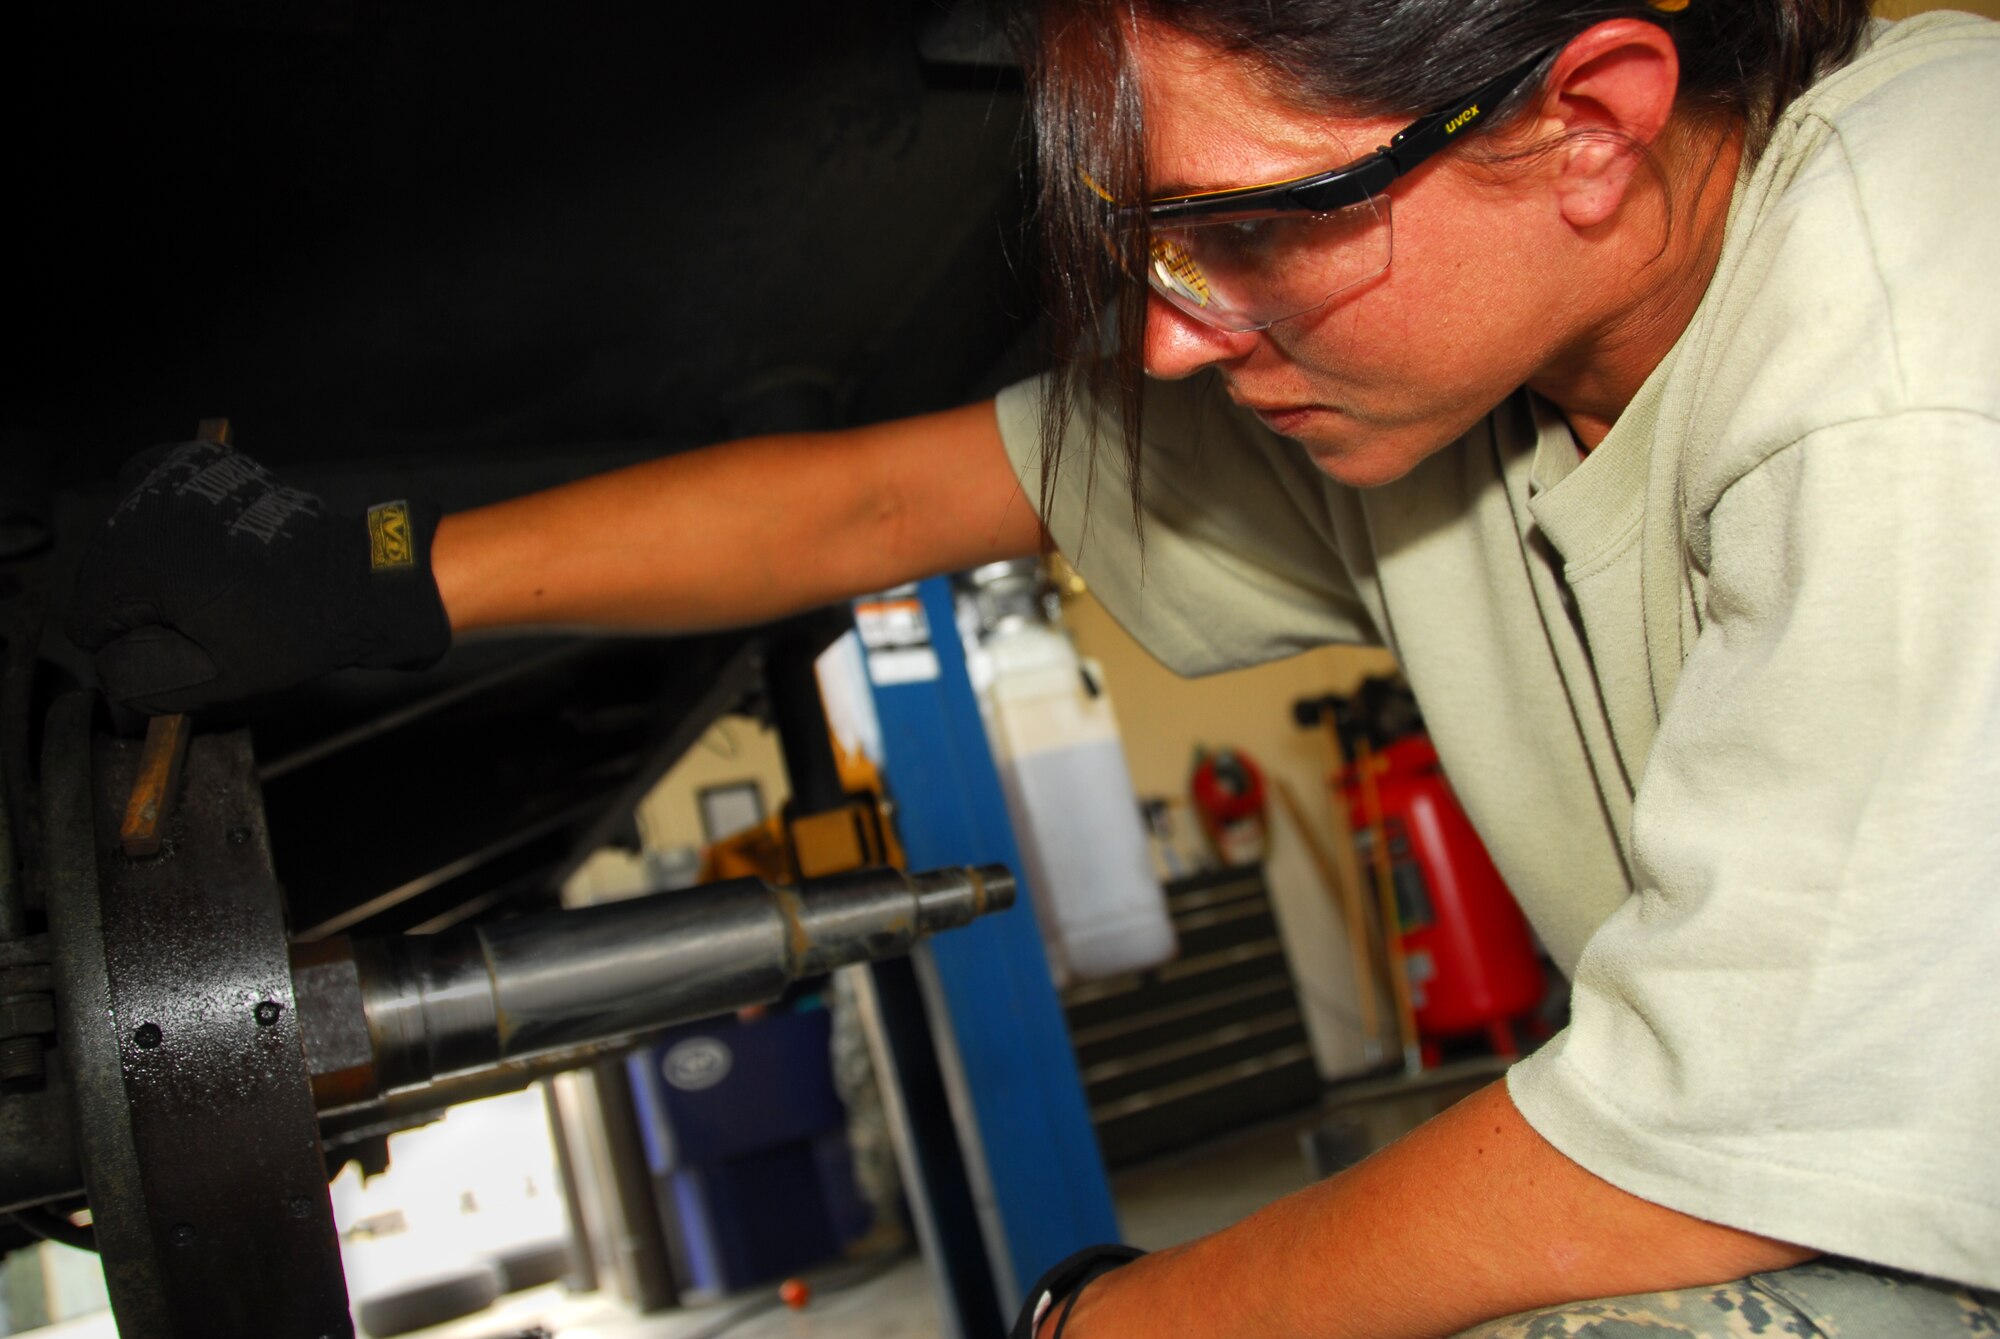 Senior Airman Teri Diemel, a munitions system apprentice with the 115th Fighter Wing, Madison, Wis. performs routine servicing on a munitions trailer.